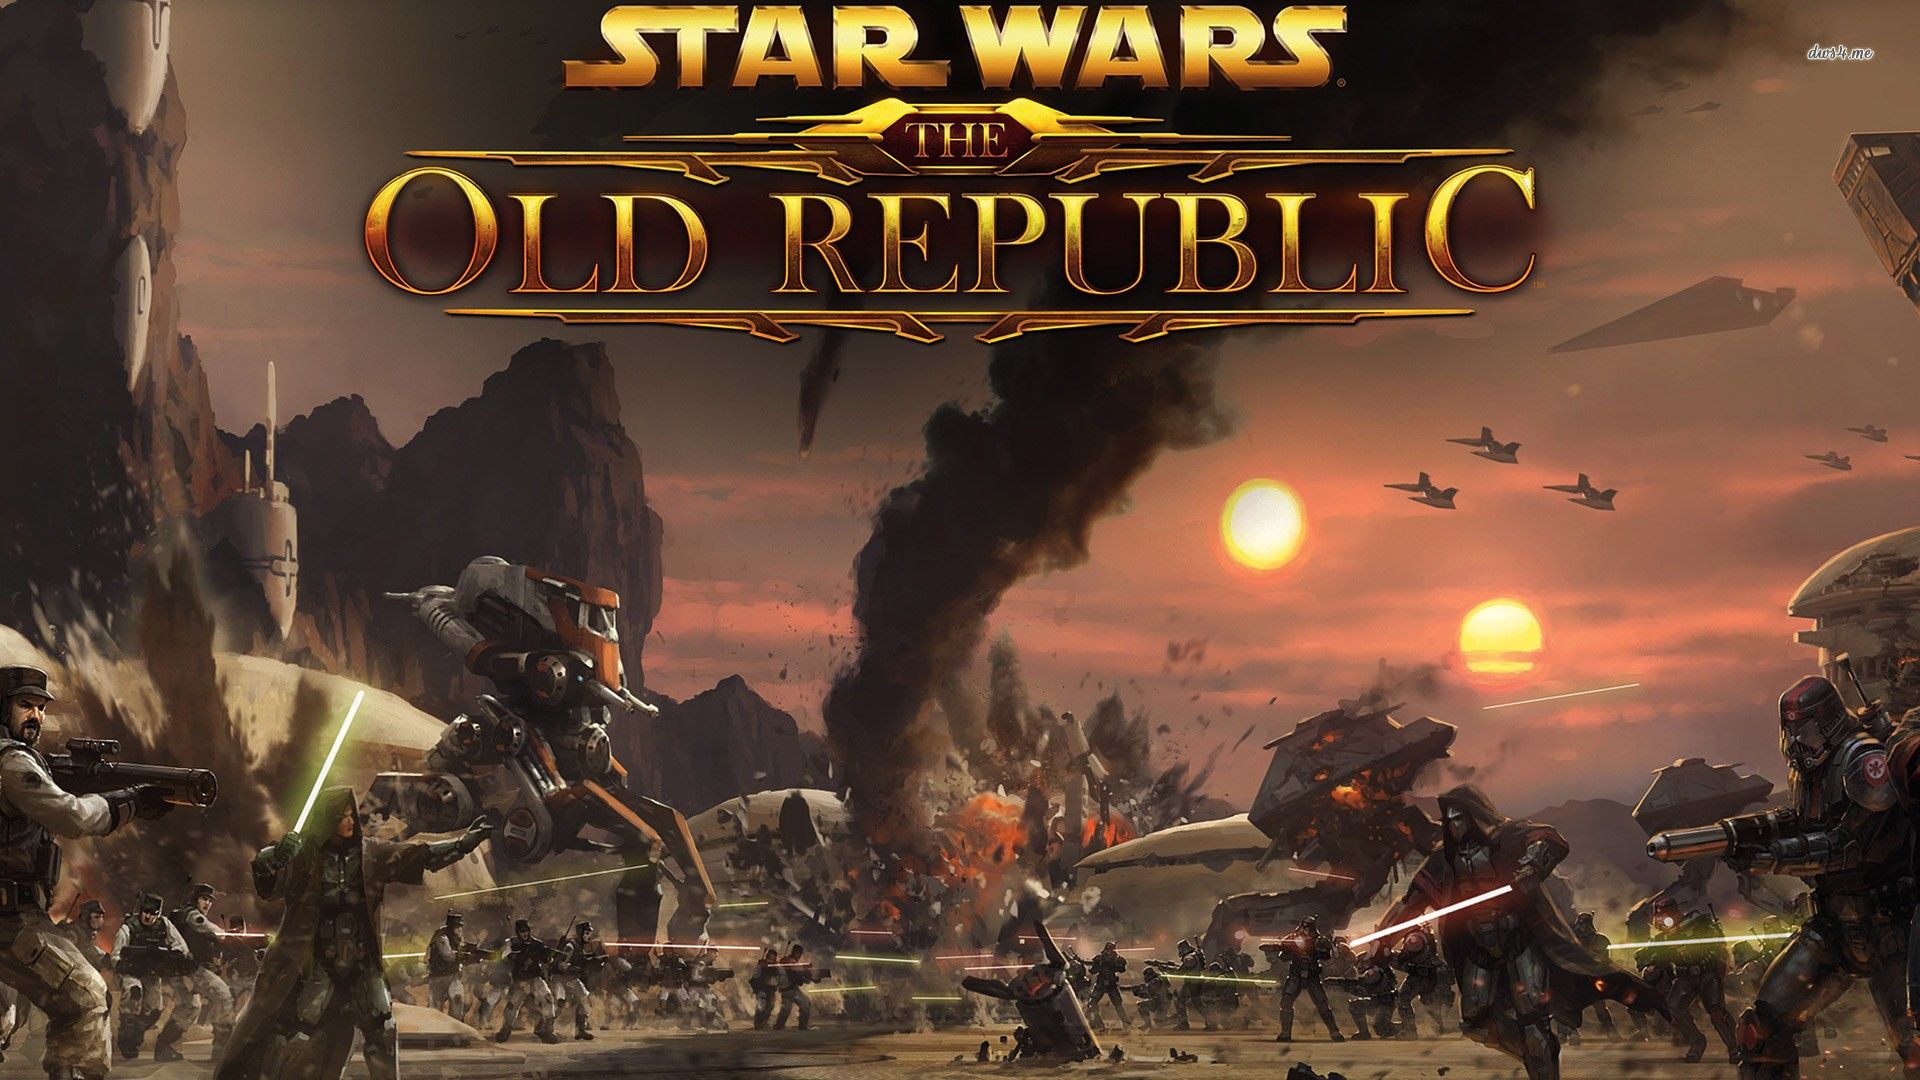 Star Wars: The Old Republic Wallpapers.